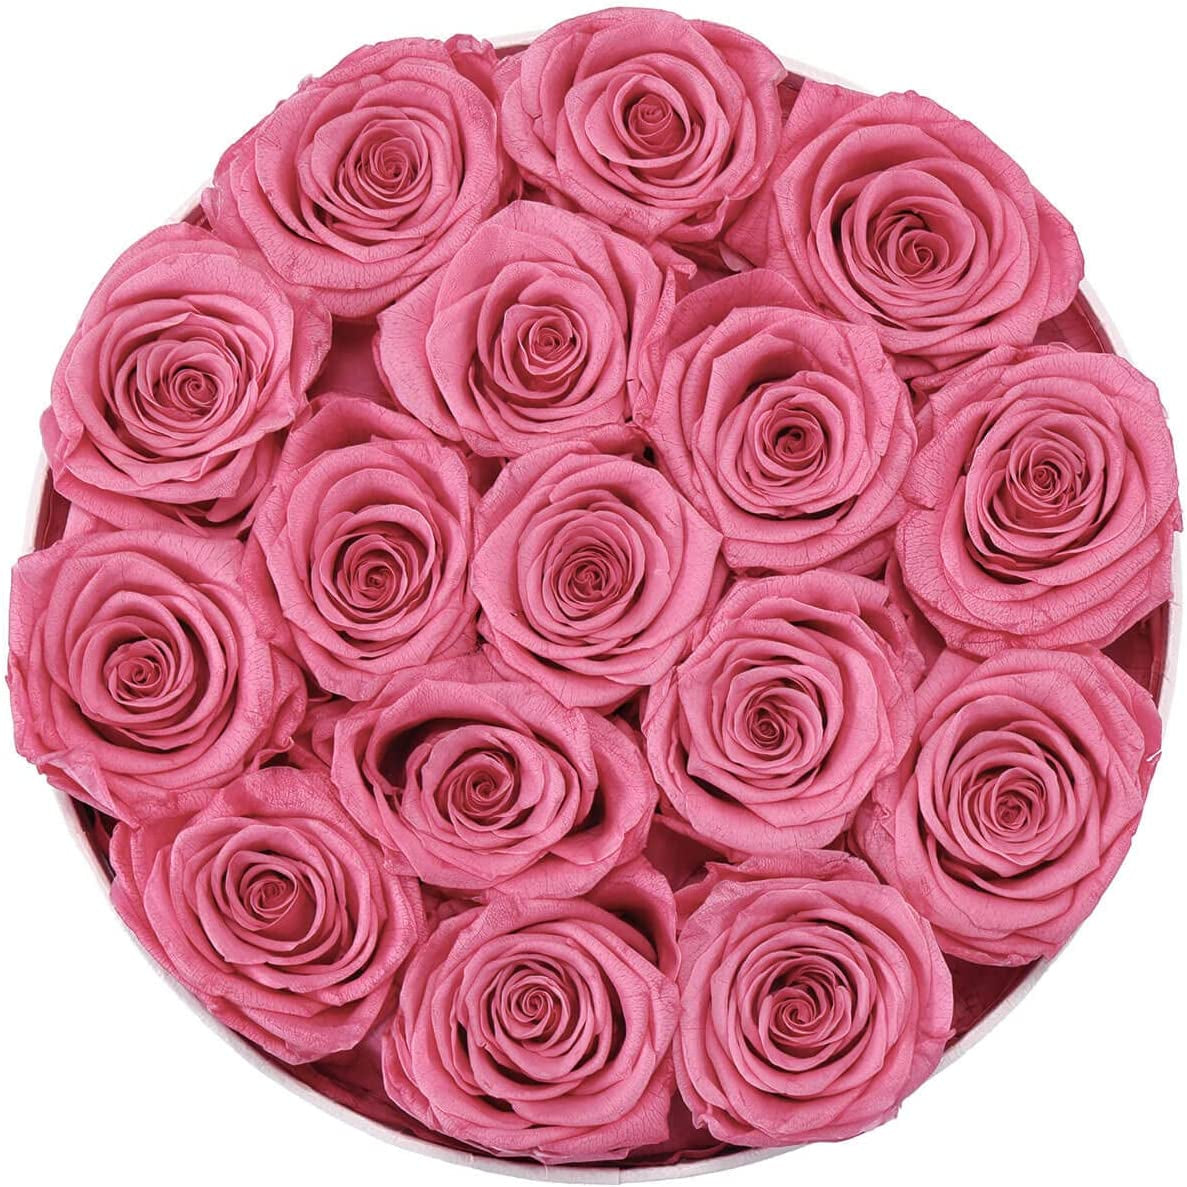 16-Piece Forever Flowers Preserved Rose in a Box Real Roses That Last a Year Preserved Flowers for Delivery Prime Mothers Day Valentines Day Christmas Day (Pink Roses, round White Box)